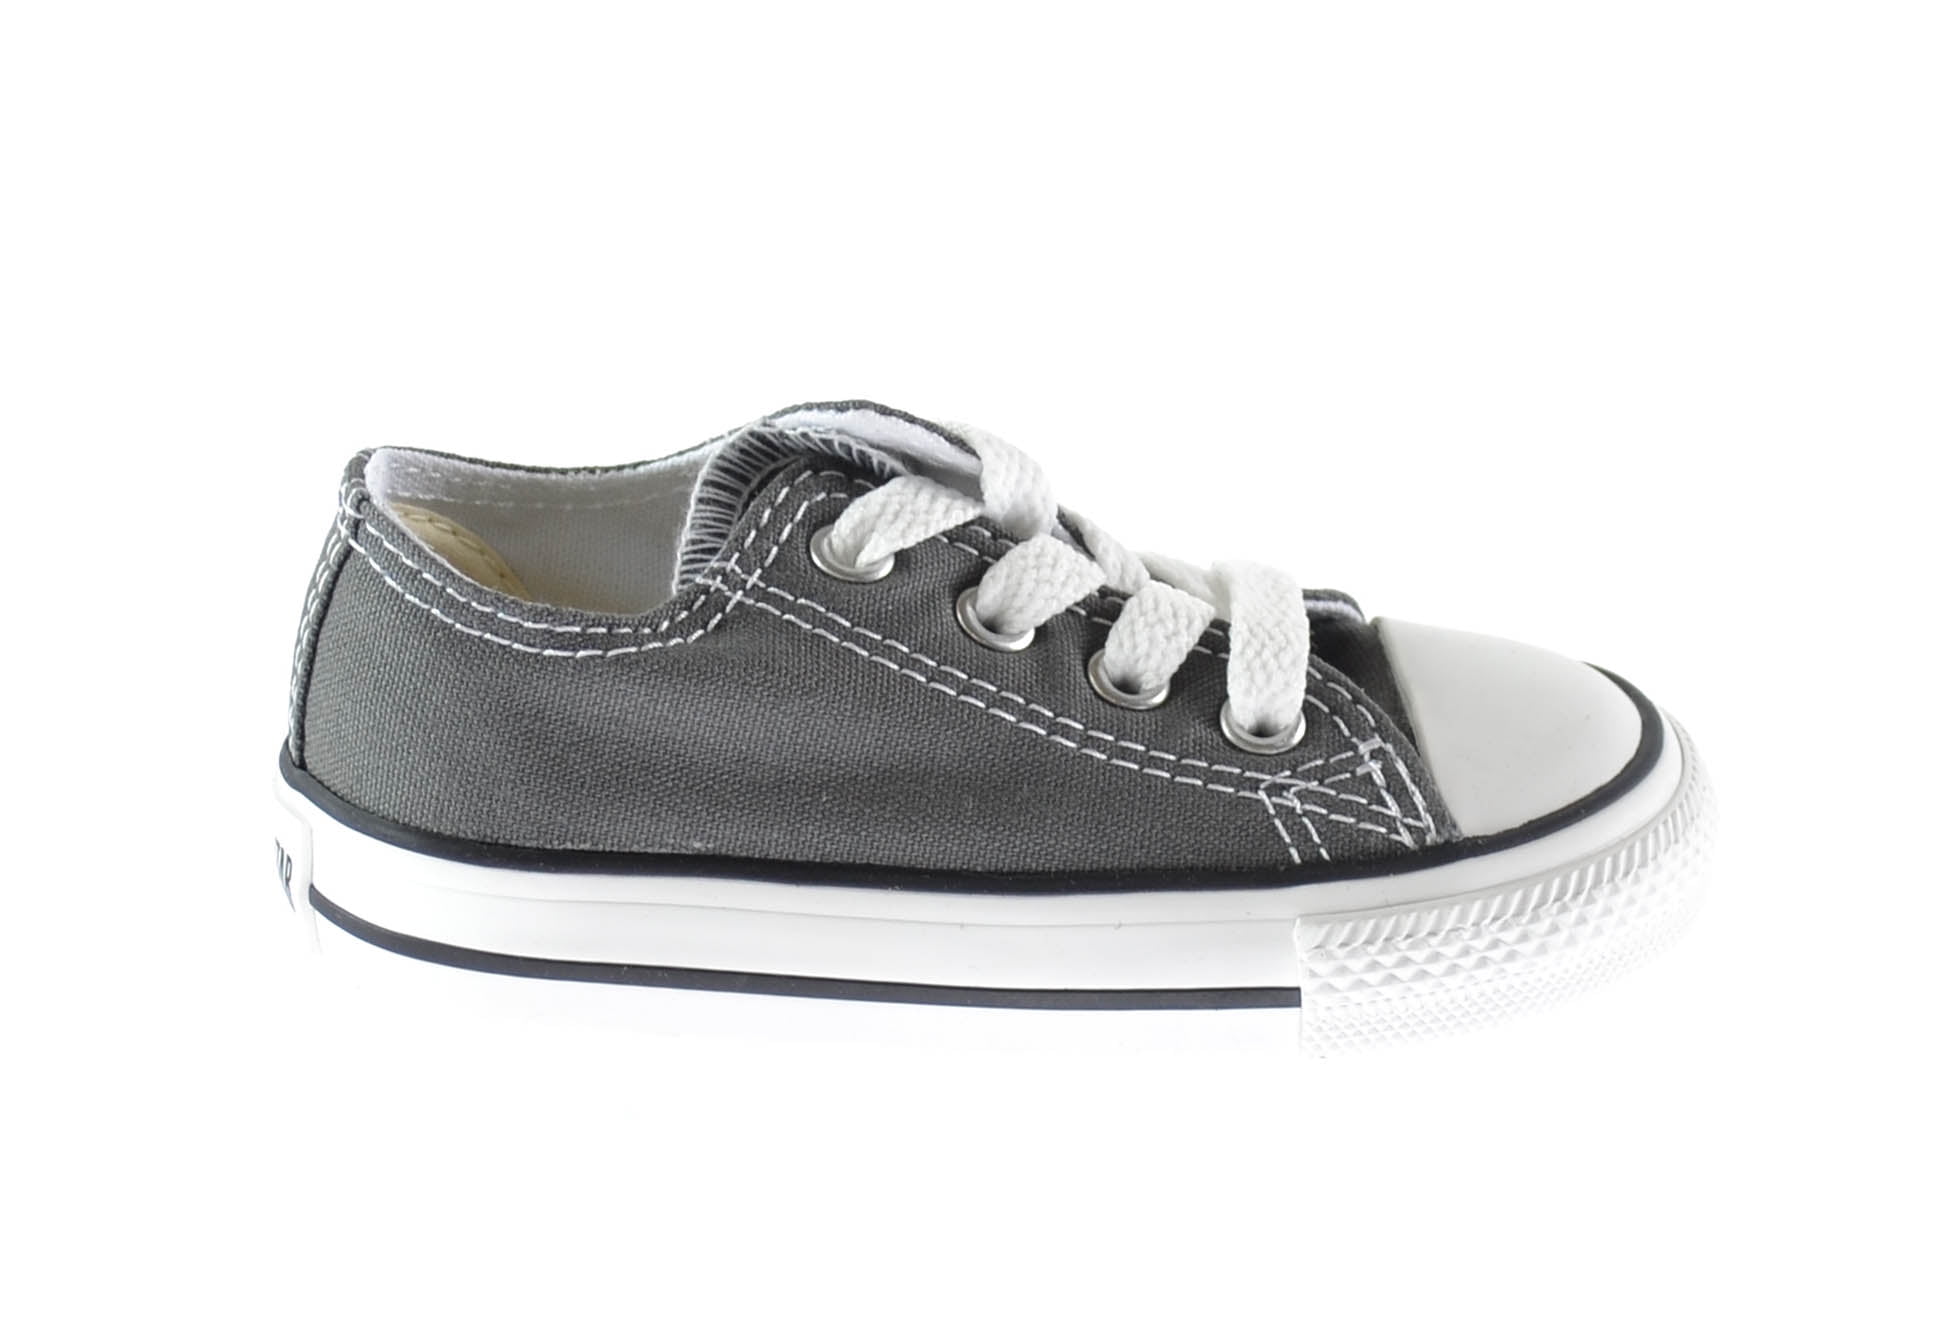 Panorama Meget sur kapok Converse Chuck Taylor All Star SP IN OX Baby Toddlers Charcoal 7j794 -  Walmart.com